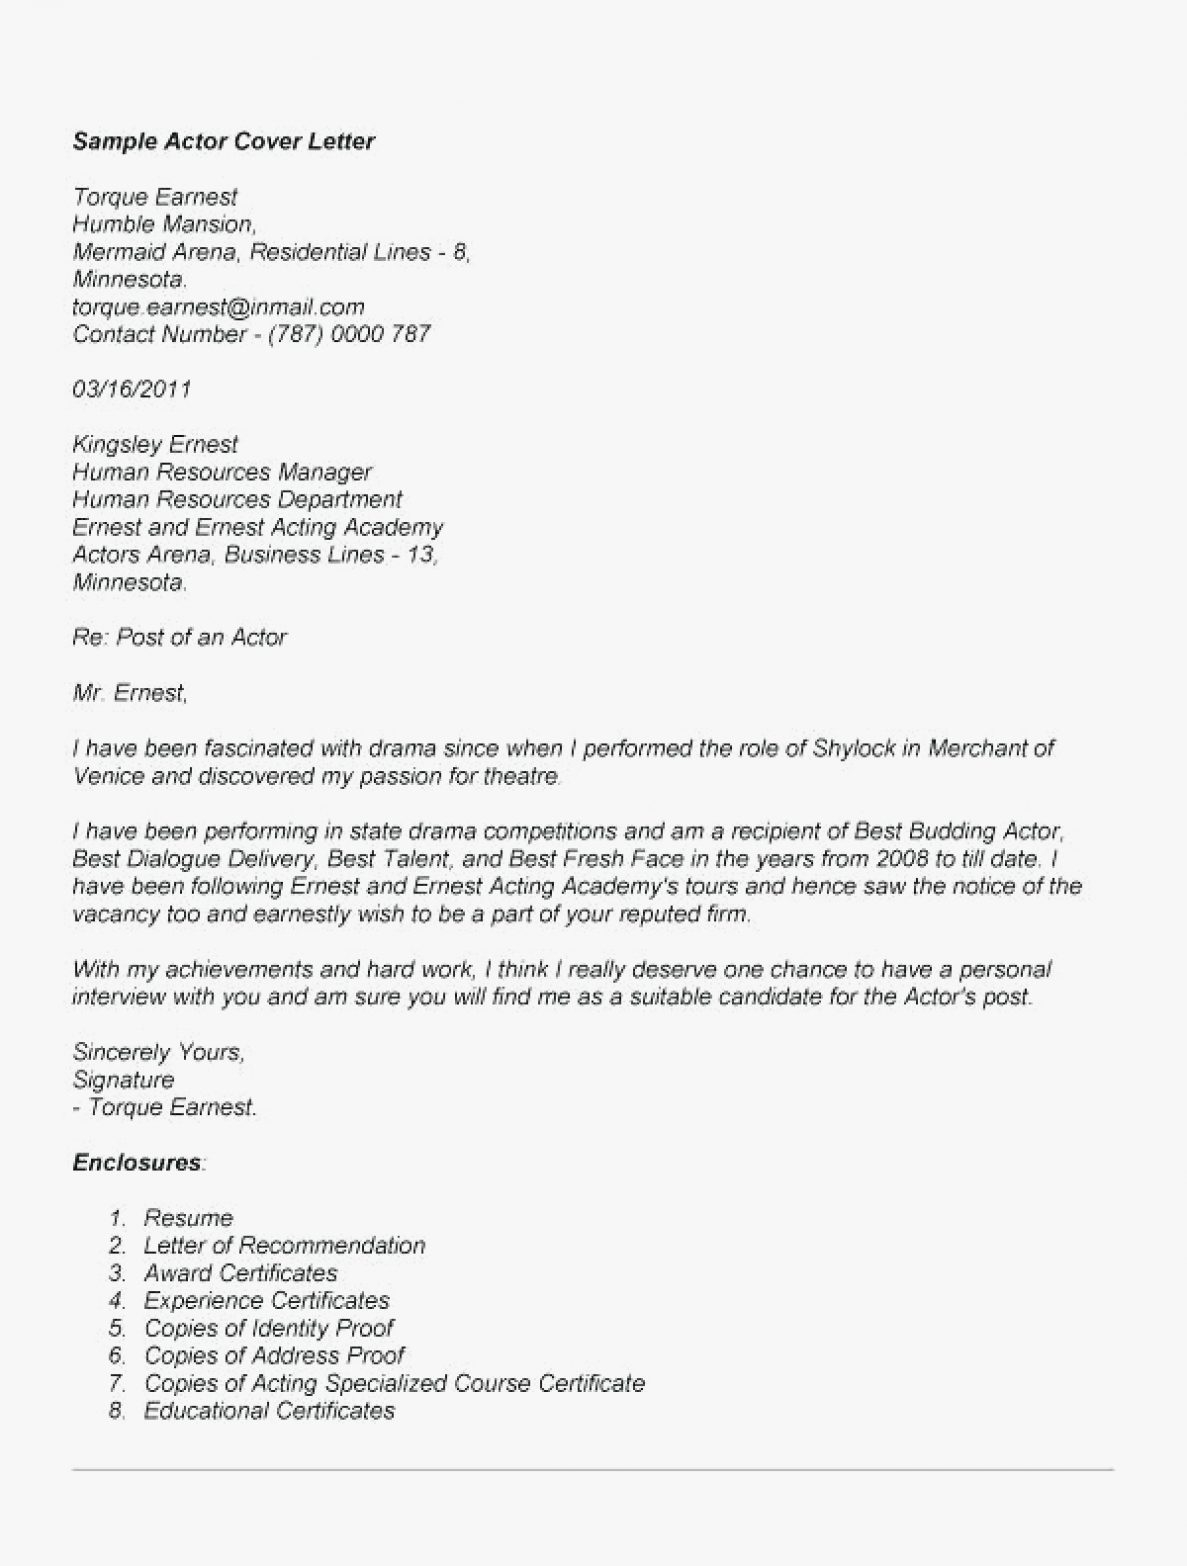 job application letter for an actor